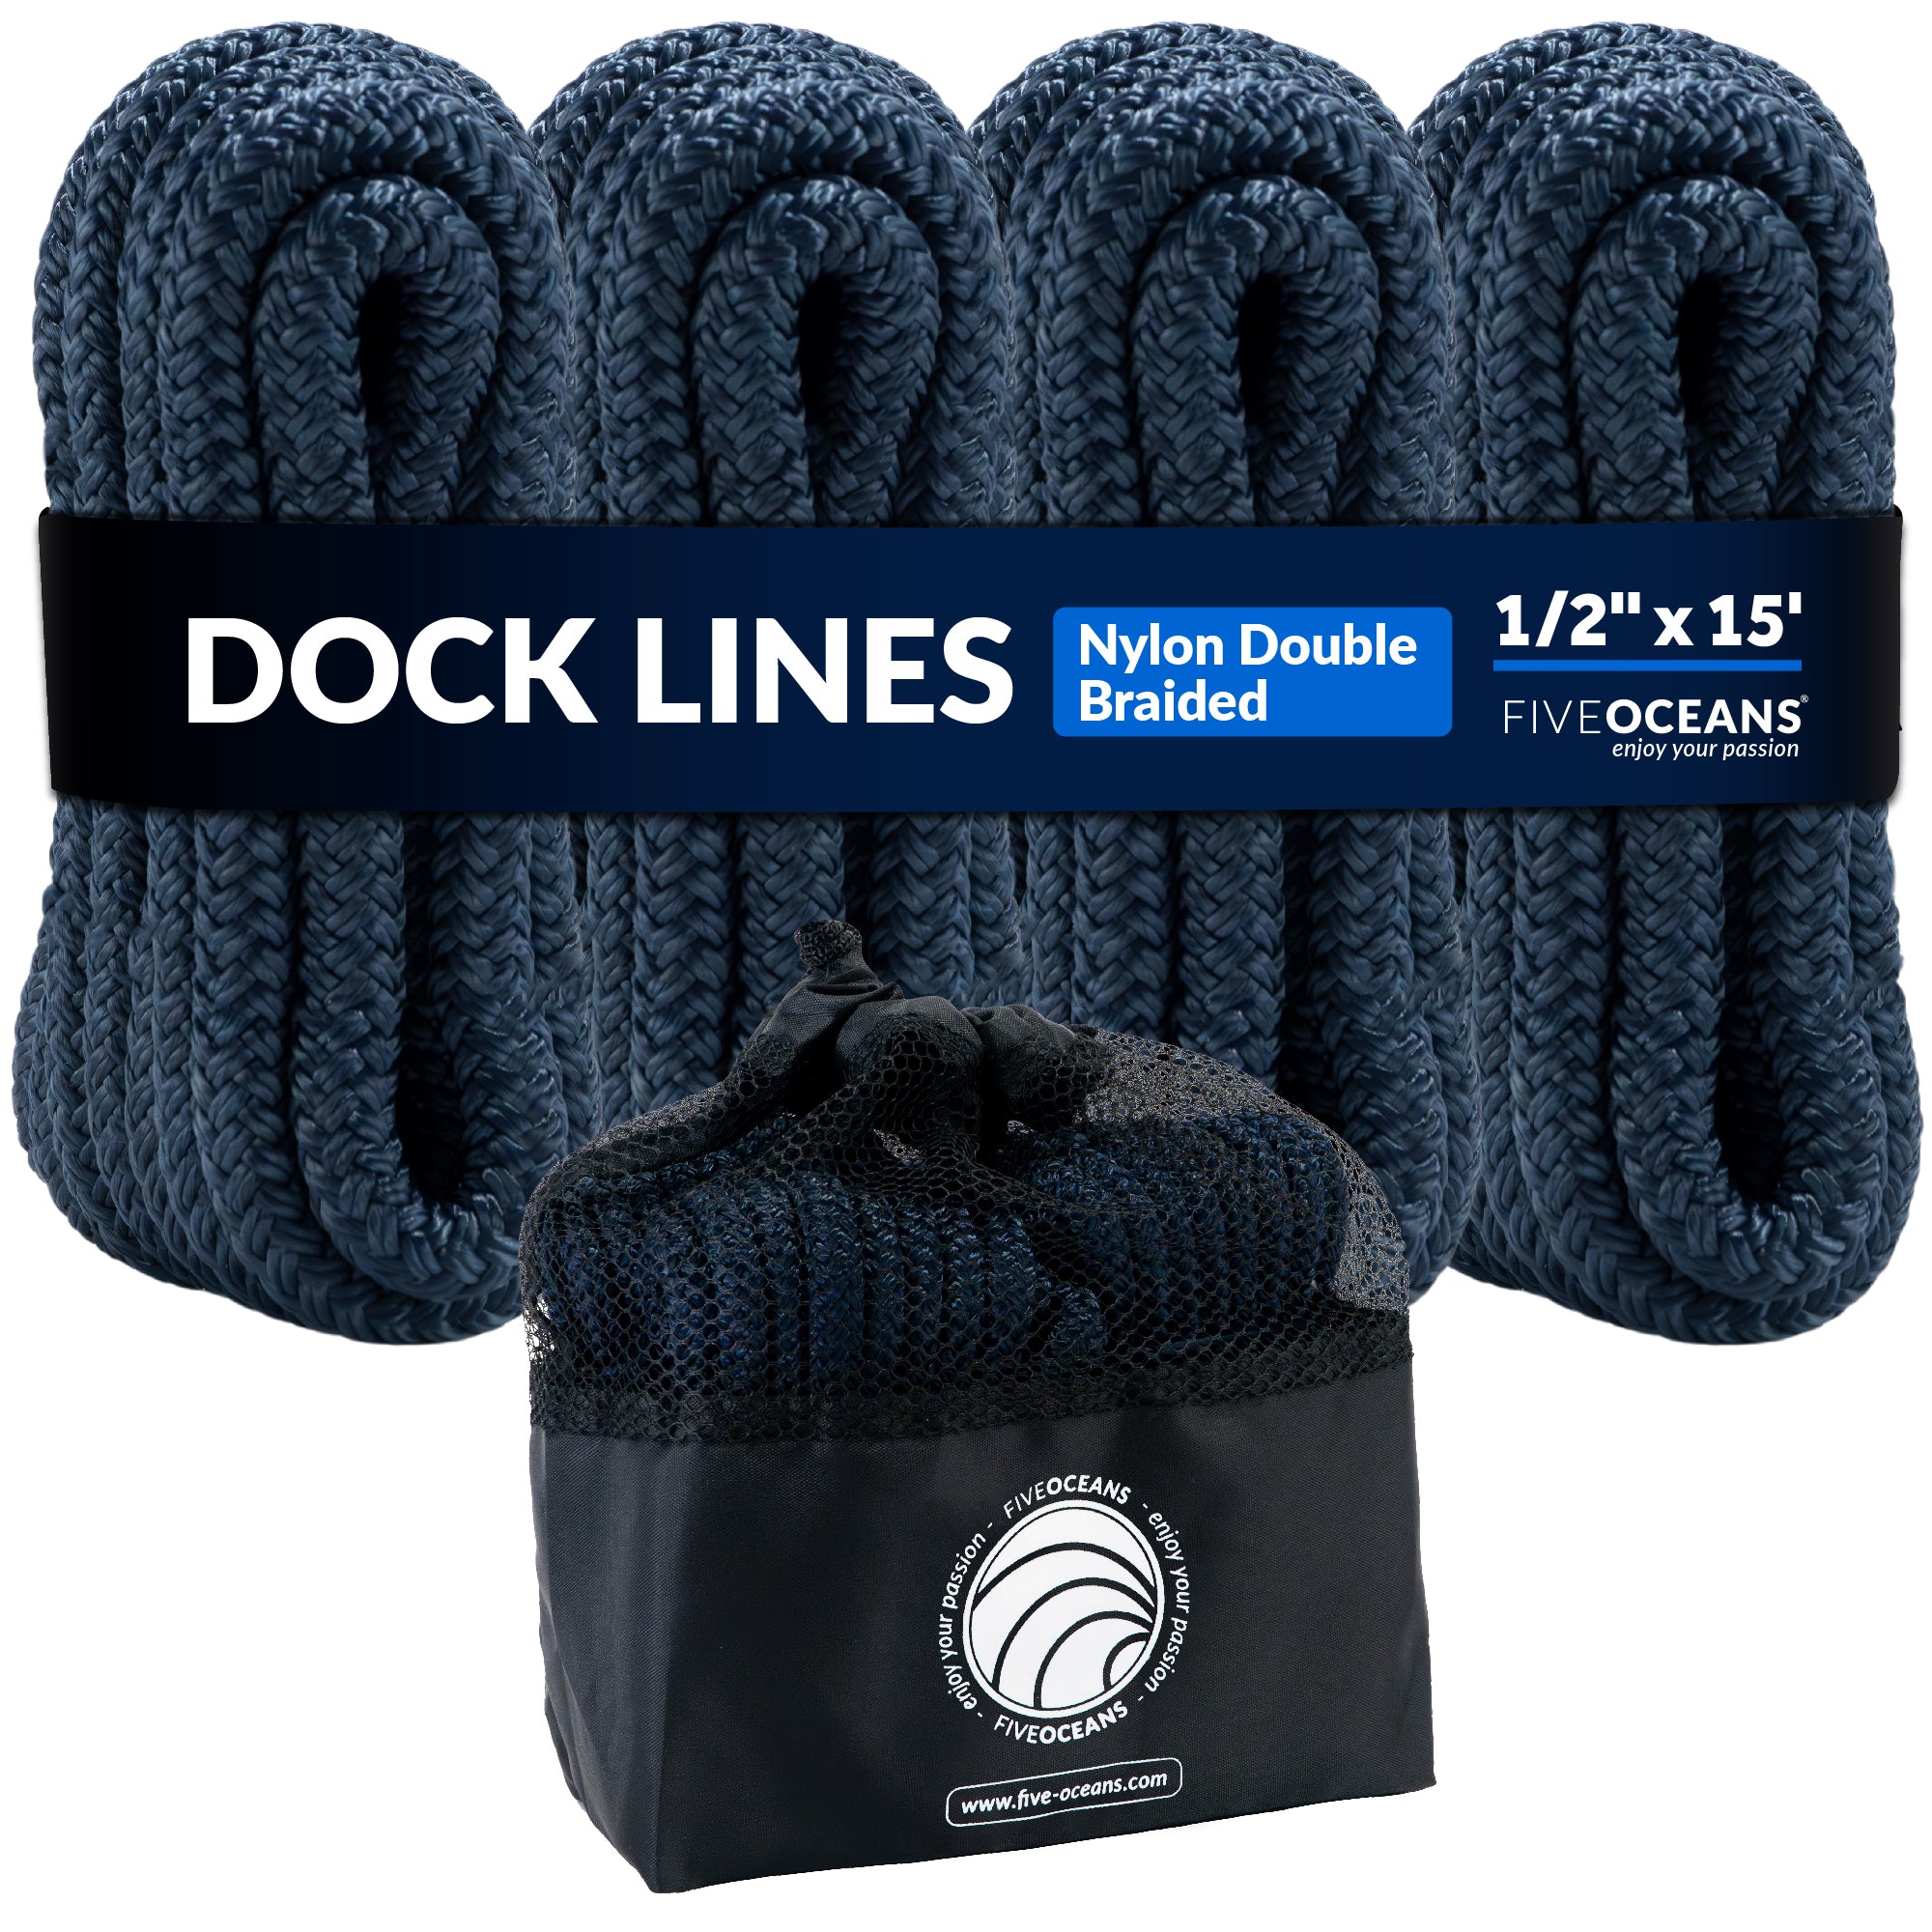 1/2" x 15' Boat Dock Lines with 12" Eyelet, 4-Pack, Navy Blue Premium Double Braid Nylon - FO4696